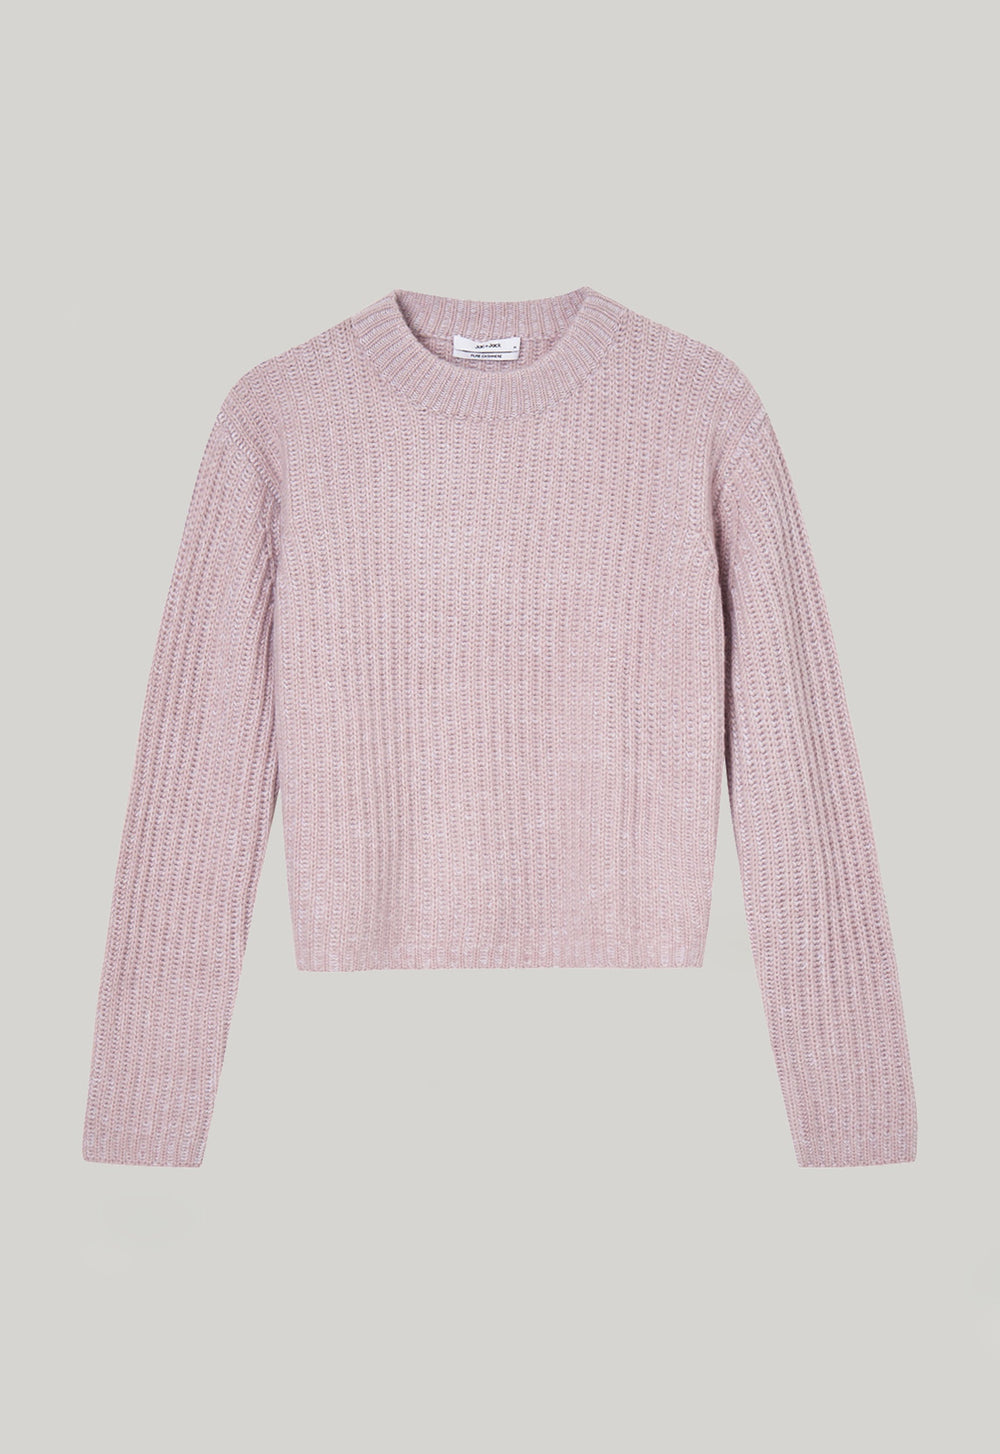 Jac+Jack HAYES CASHMERE SWEATER in Musk/whisper